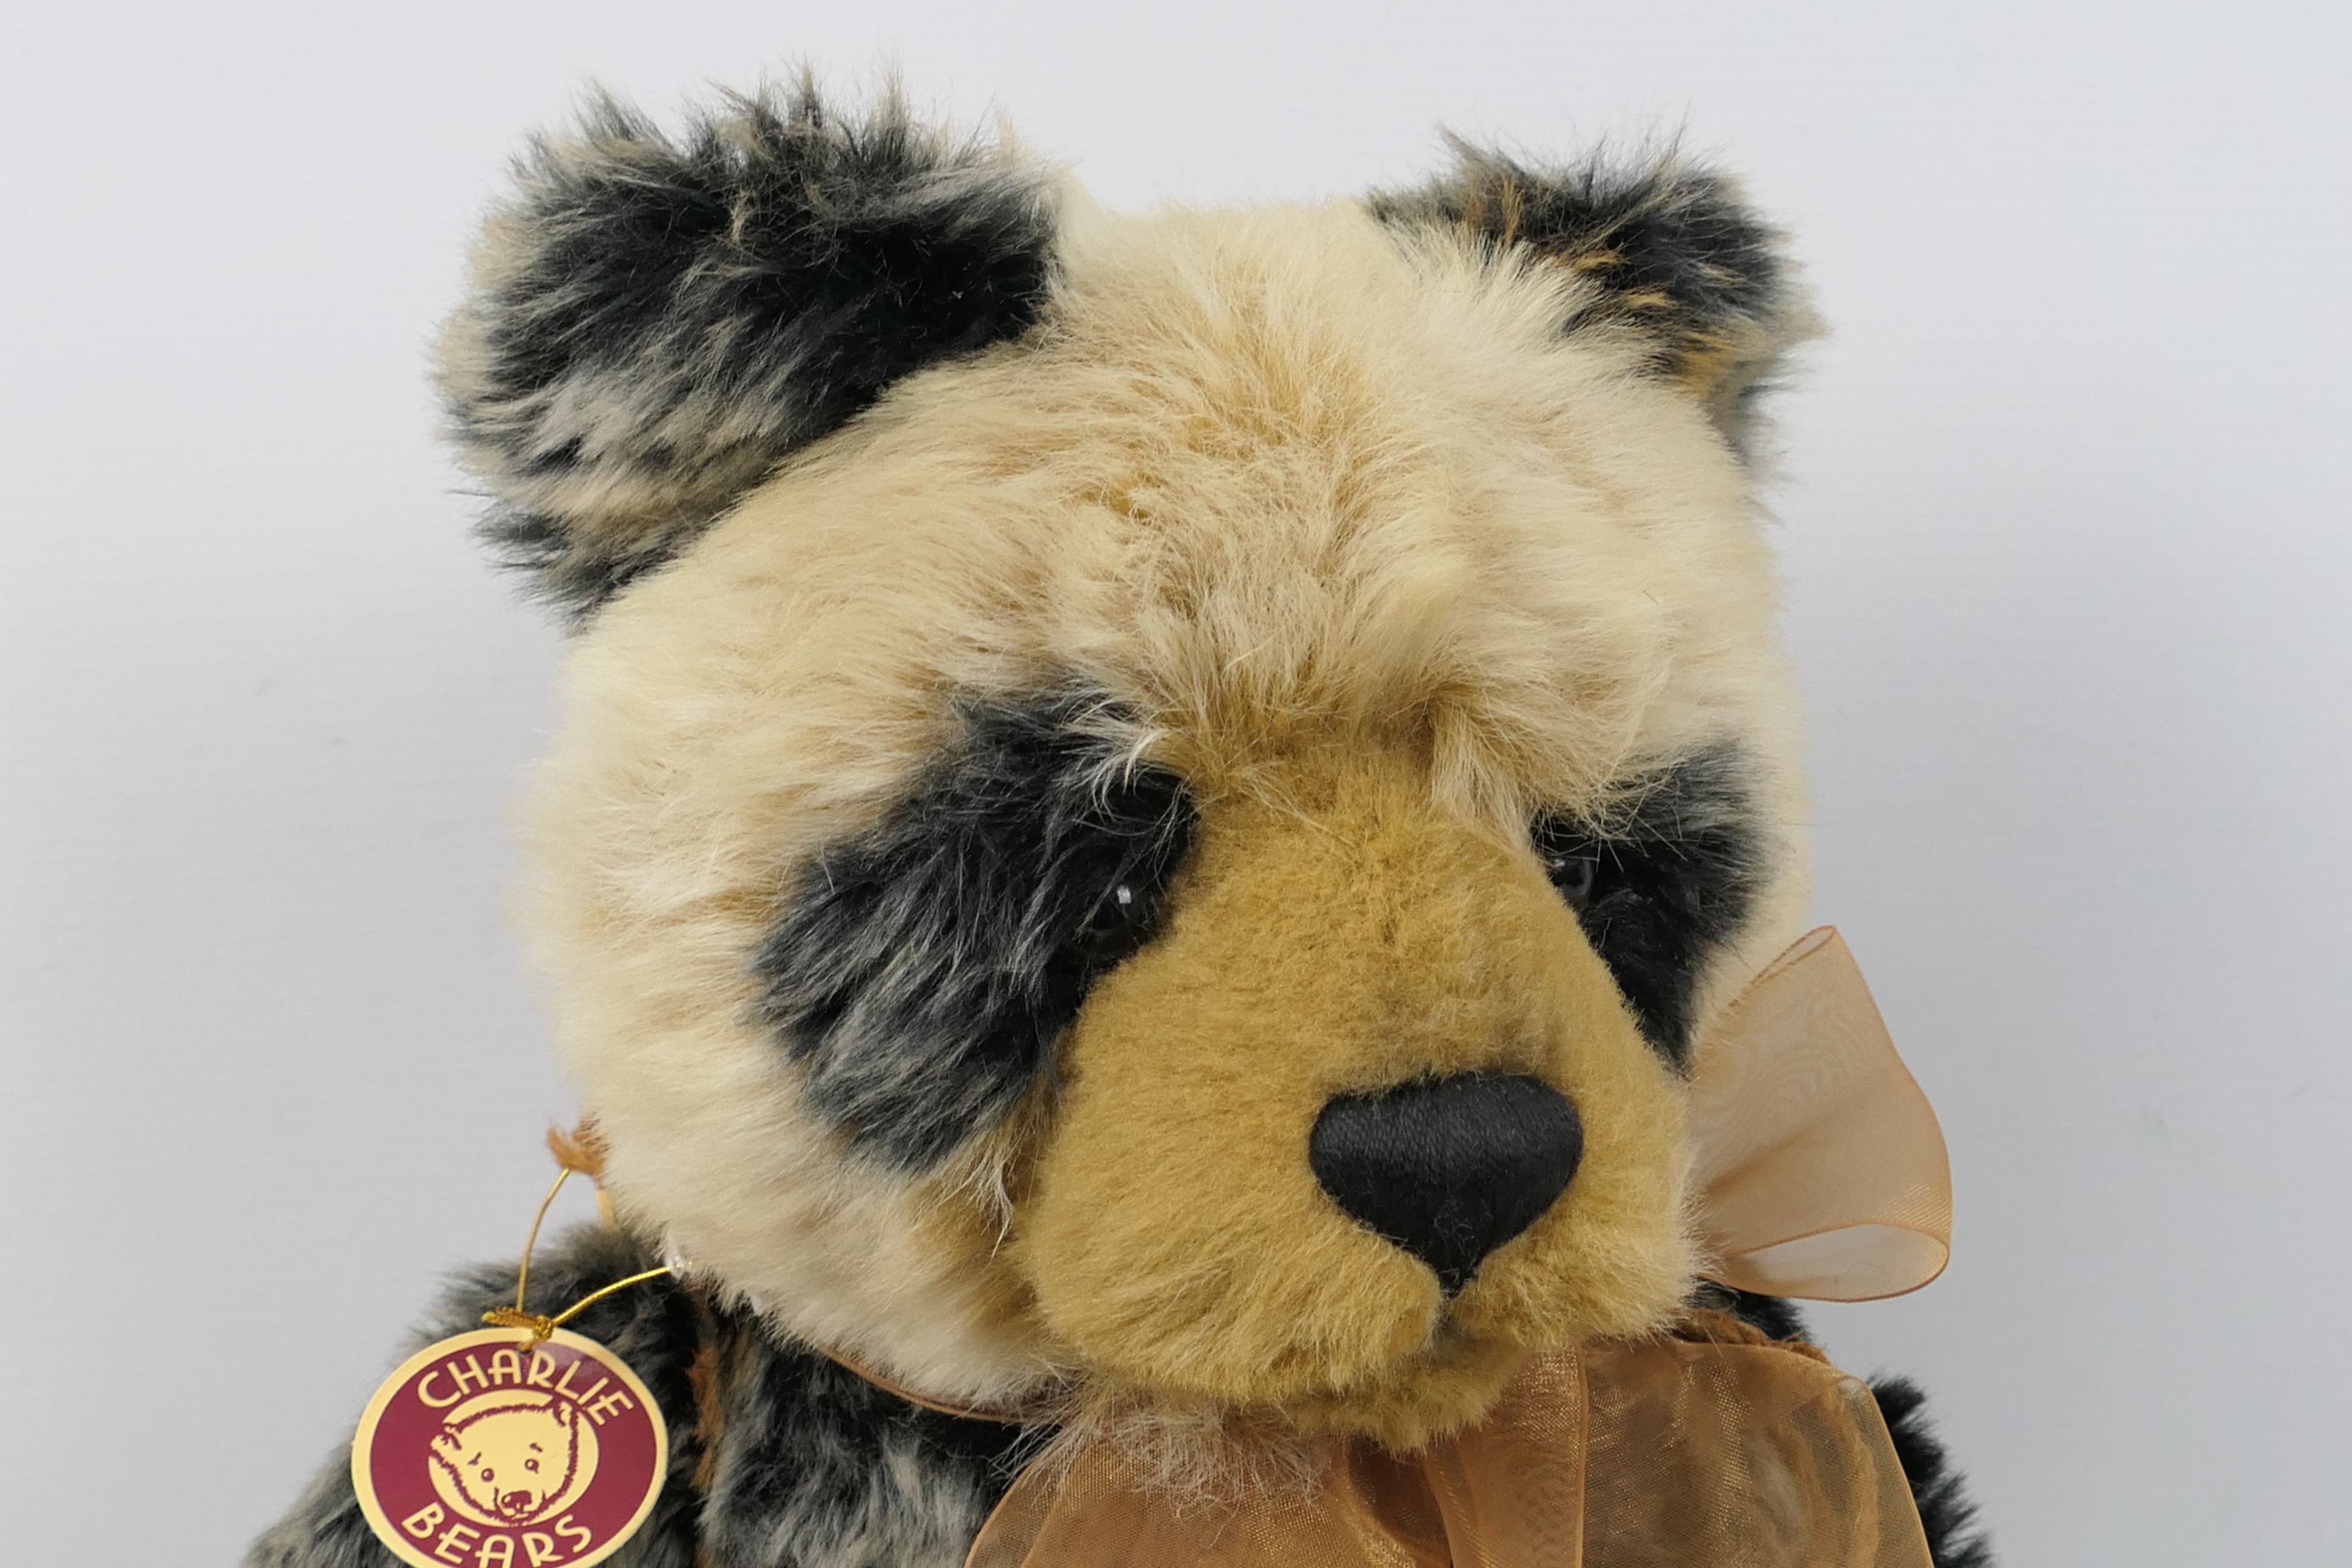 Charlie Bears - Manfred. - Image 2 of 5